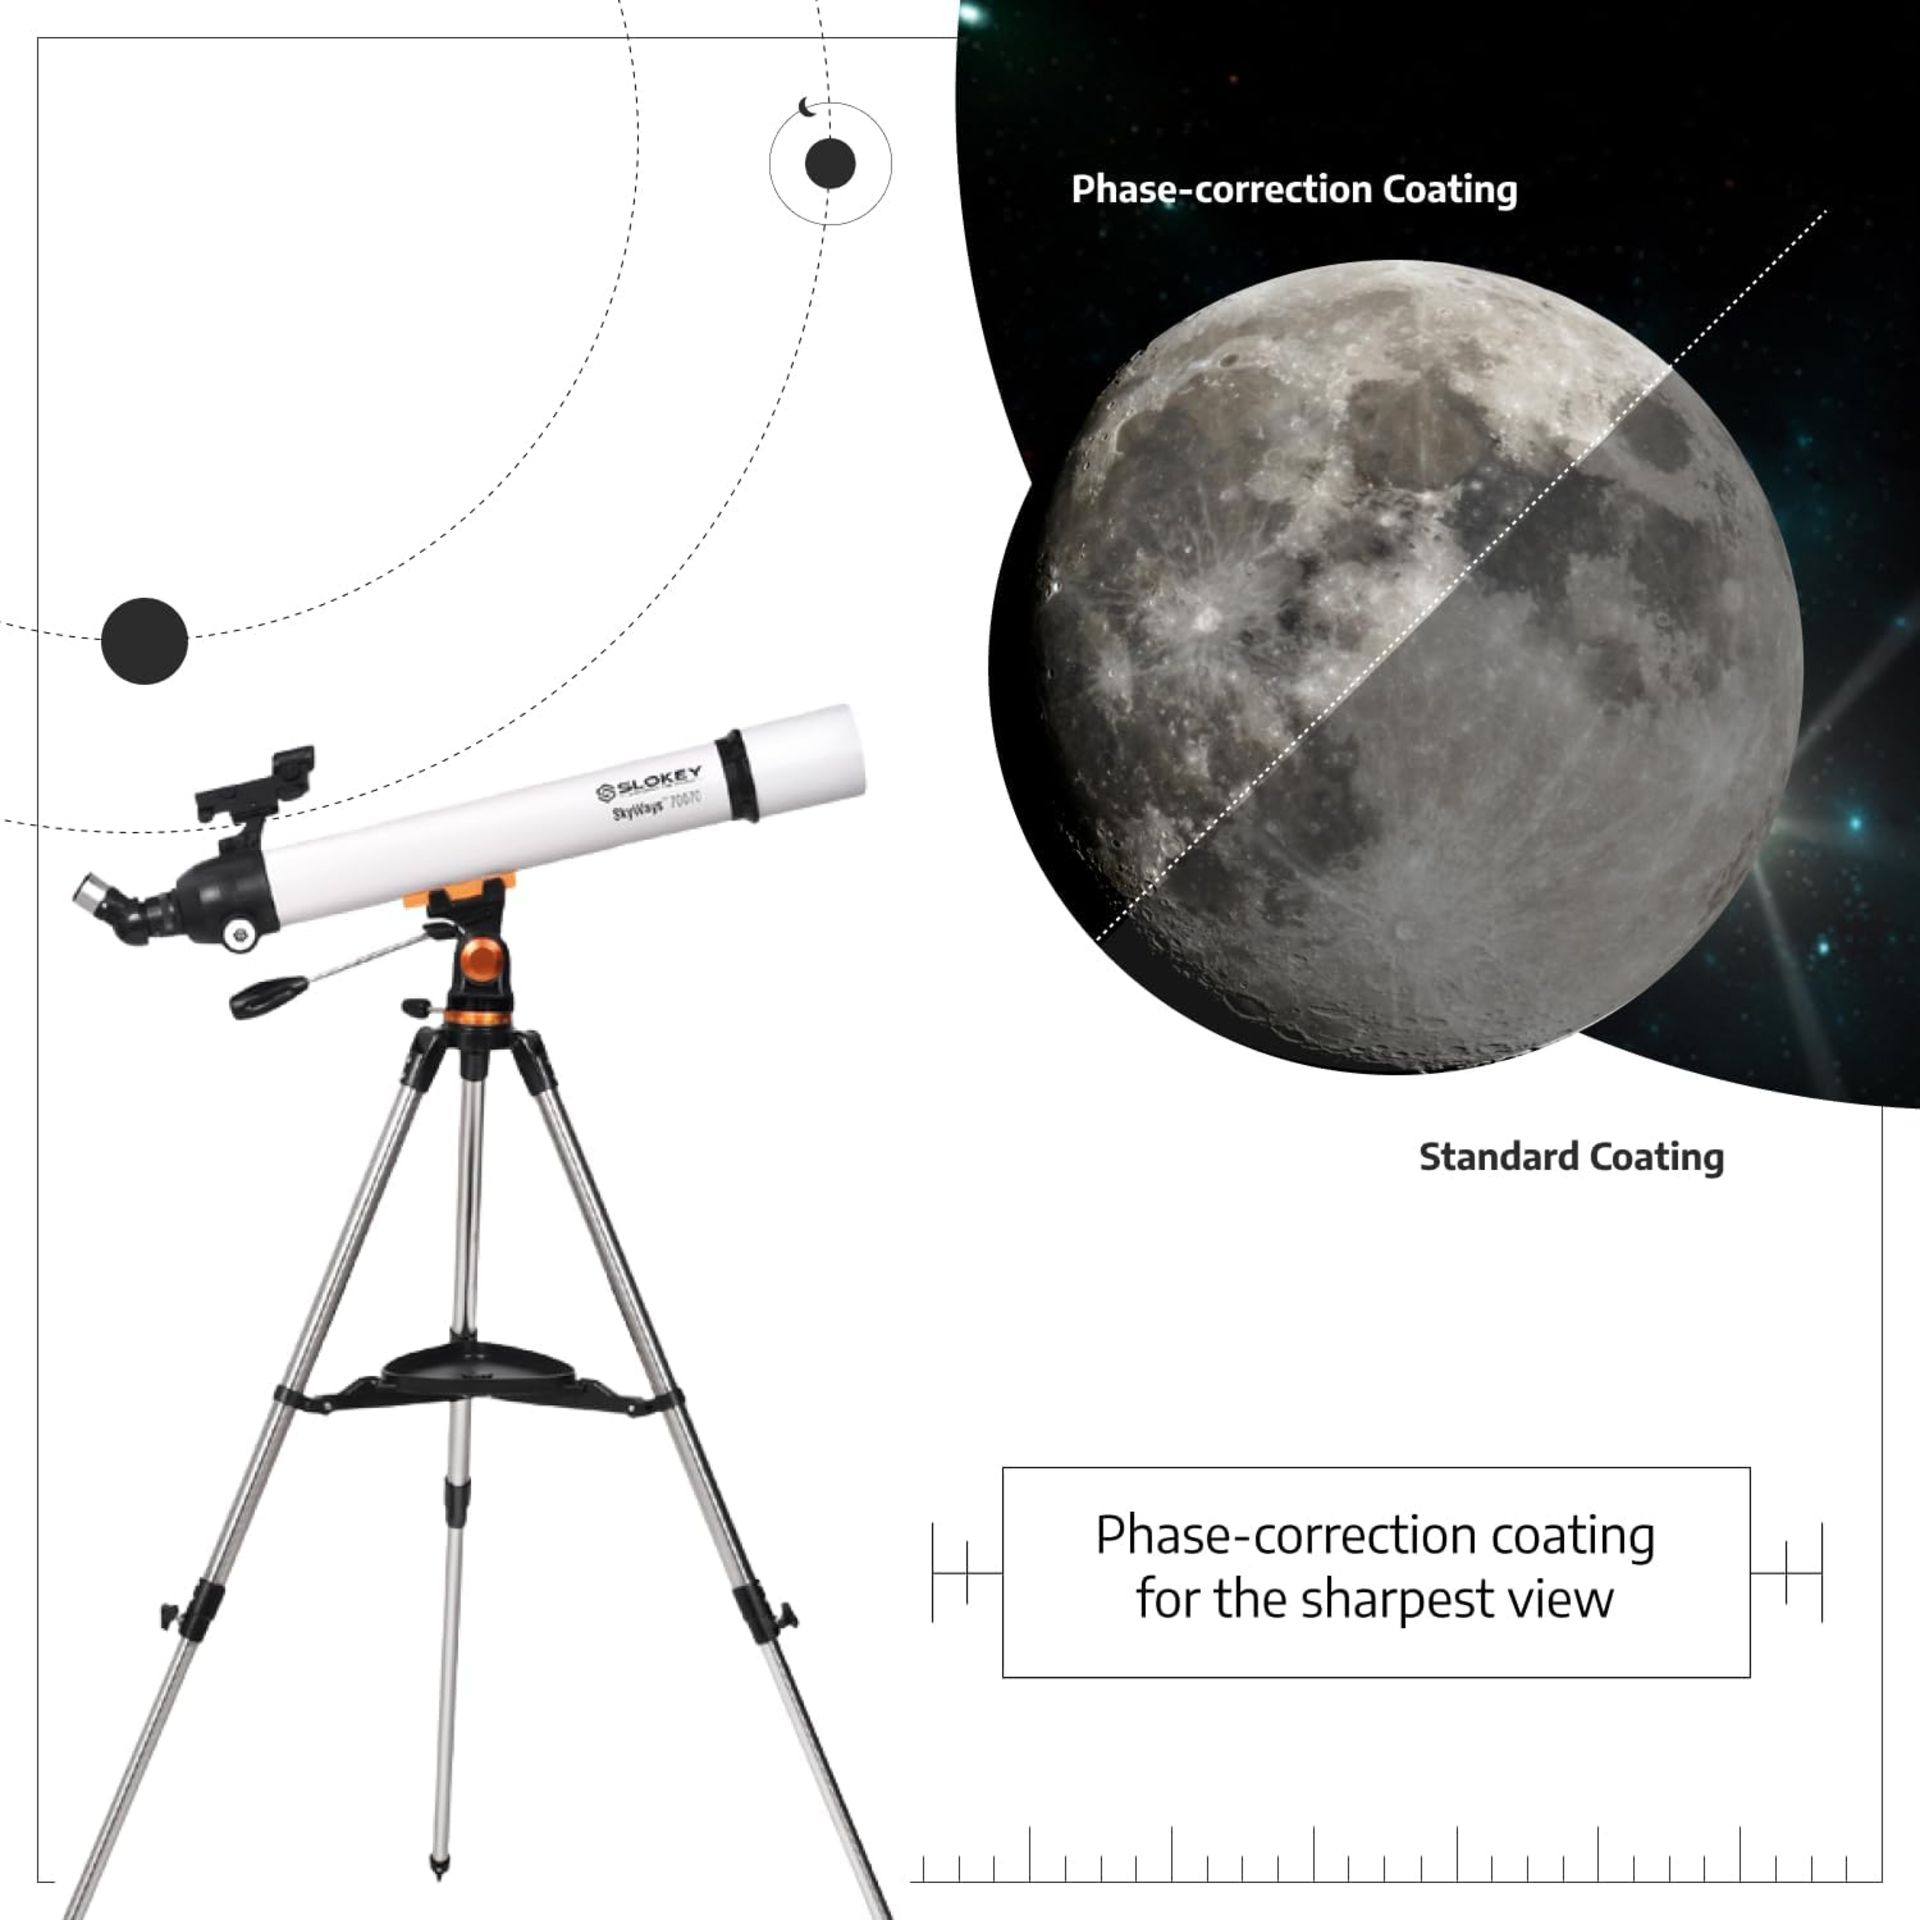 Slokey 70070 SKYWAYS TELESCOPE FOR ASTRONOMY WITH ACCESSORIES (NEW) - AMAZON RRP Â£159.99 - Image 8 of 10